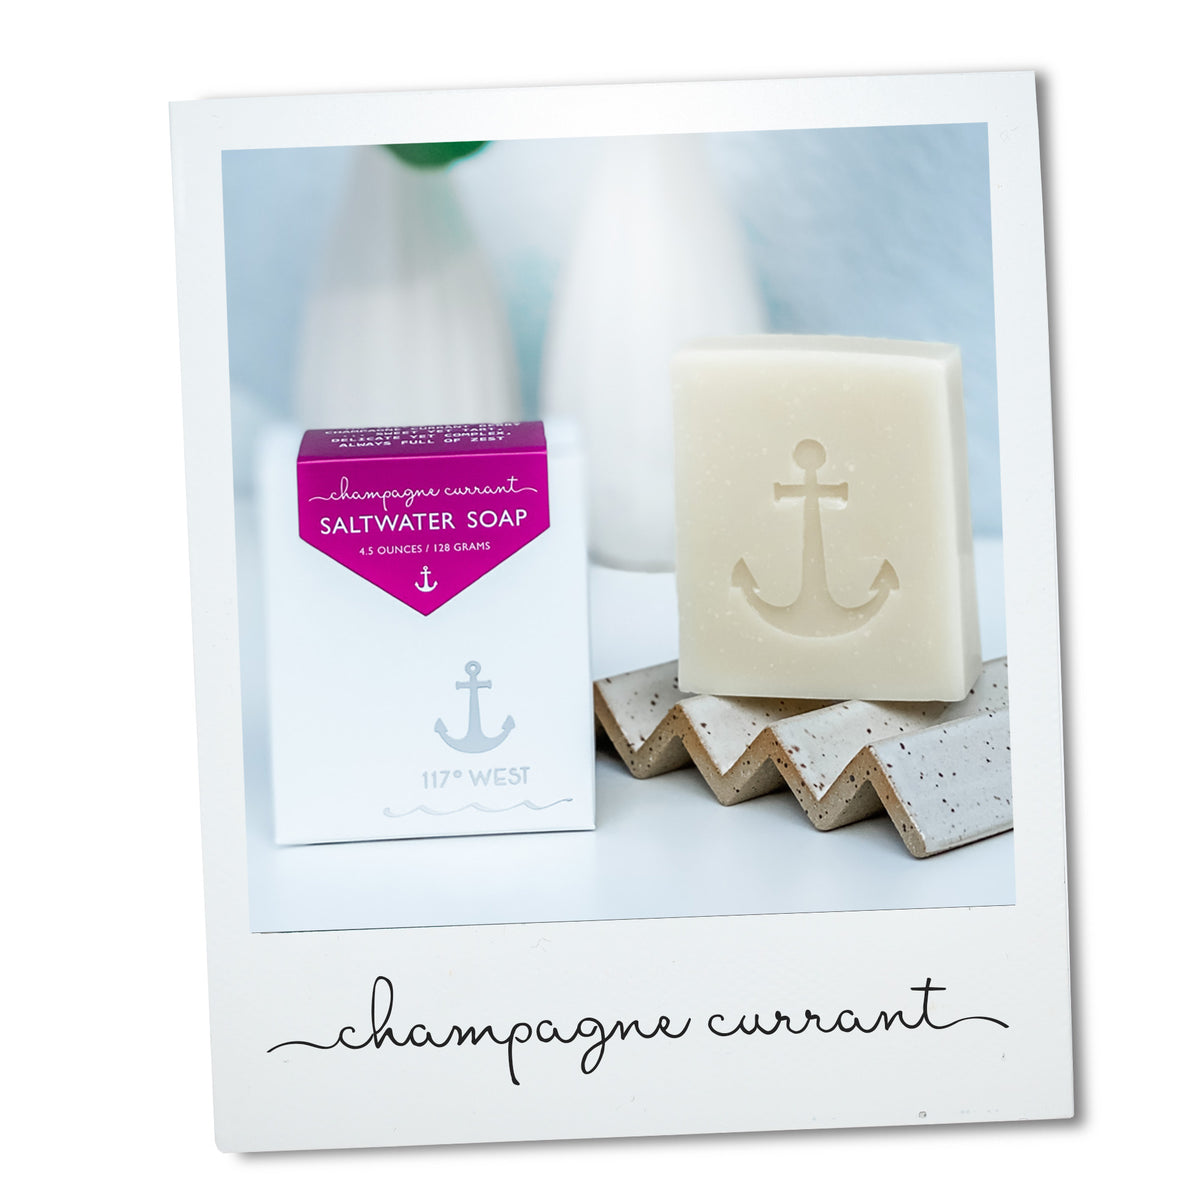 (on left) champagne currant saltwater soap box, (on right) champagne currant saltwater soap bar on ceramic dish